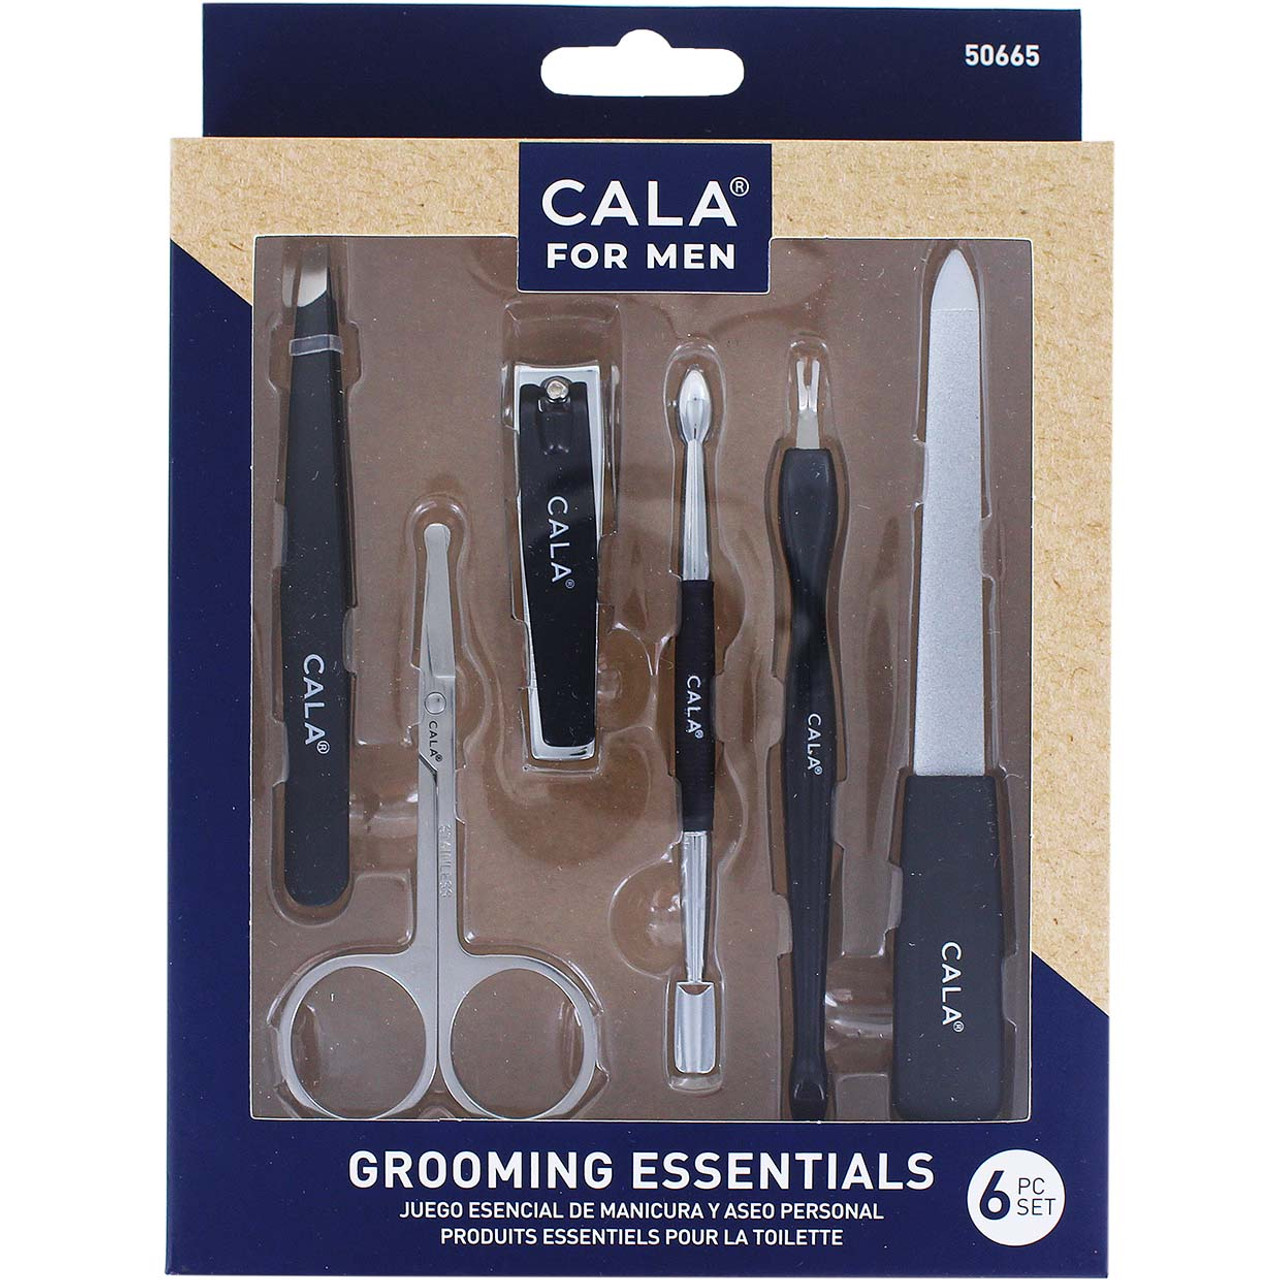 https://cdn11.bigcommerce.com/s-dgbc5lzb0p/images/stencil/1280x1280/products/7100/20499/Cala_For_Men_Grooming_Essentials_6_Pc_Set__12721.1600193642.jpg?c=2?imbypass=on